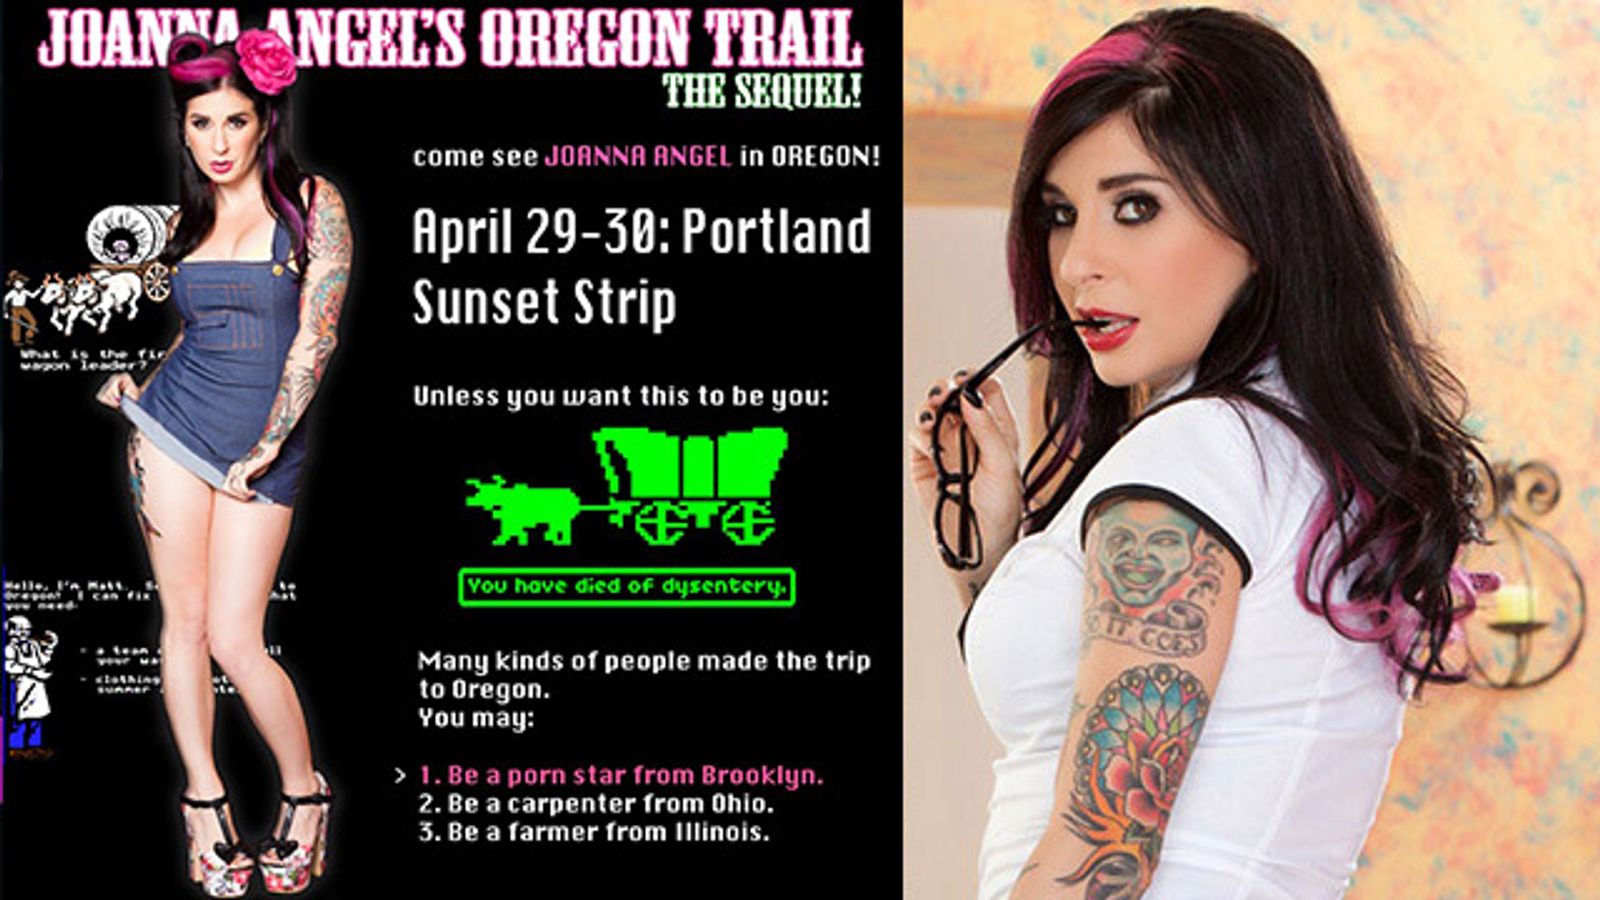 Joanna Angel Returns To The Oregon Trail For a Spring Stripping Sequel